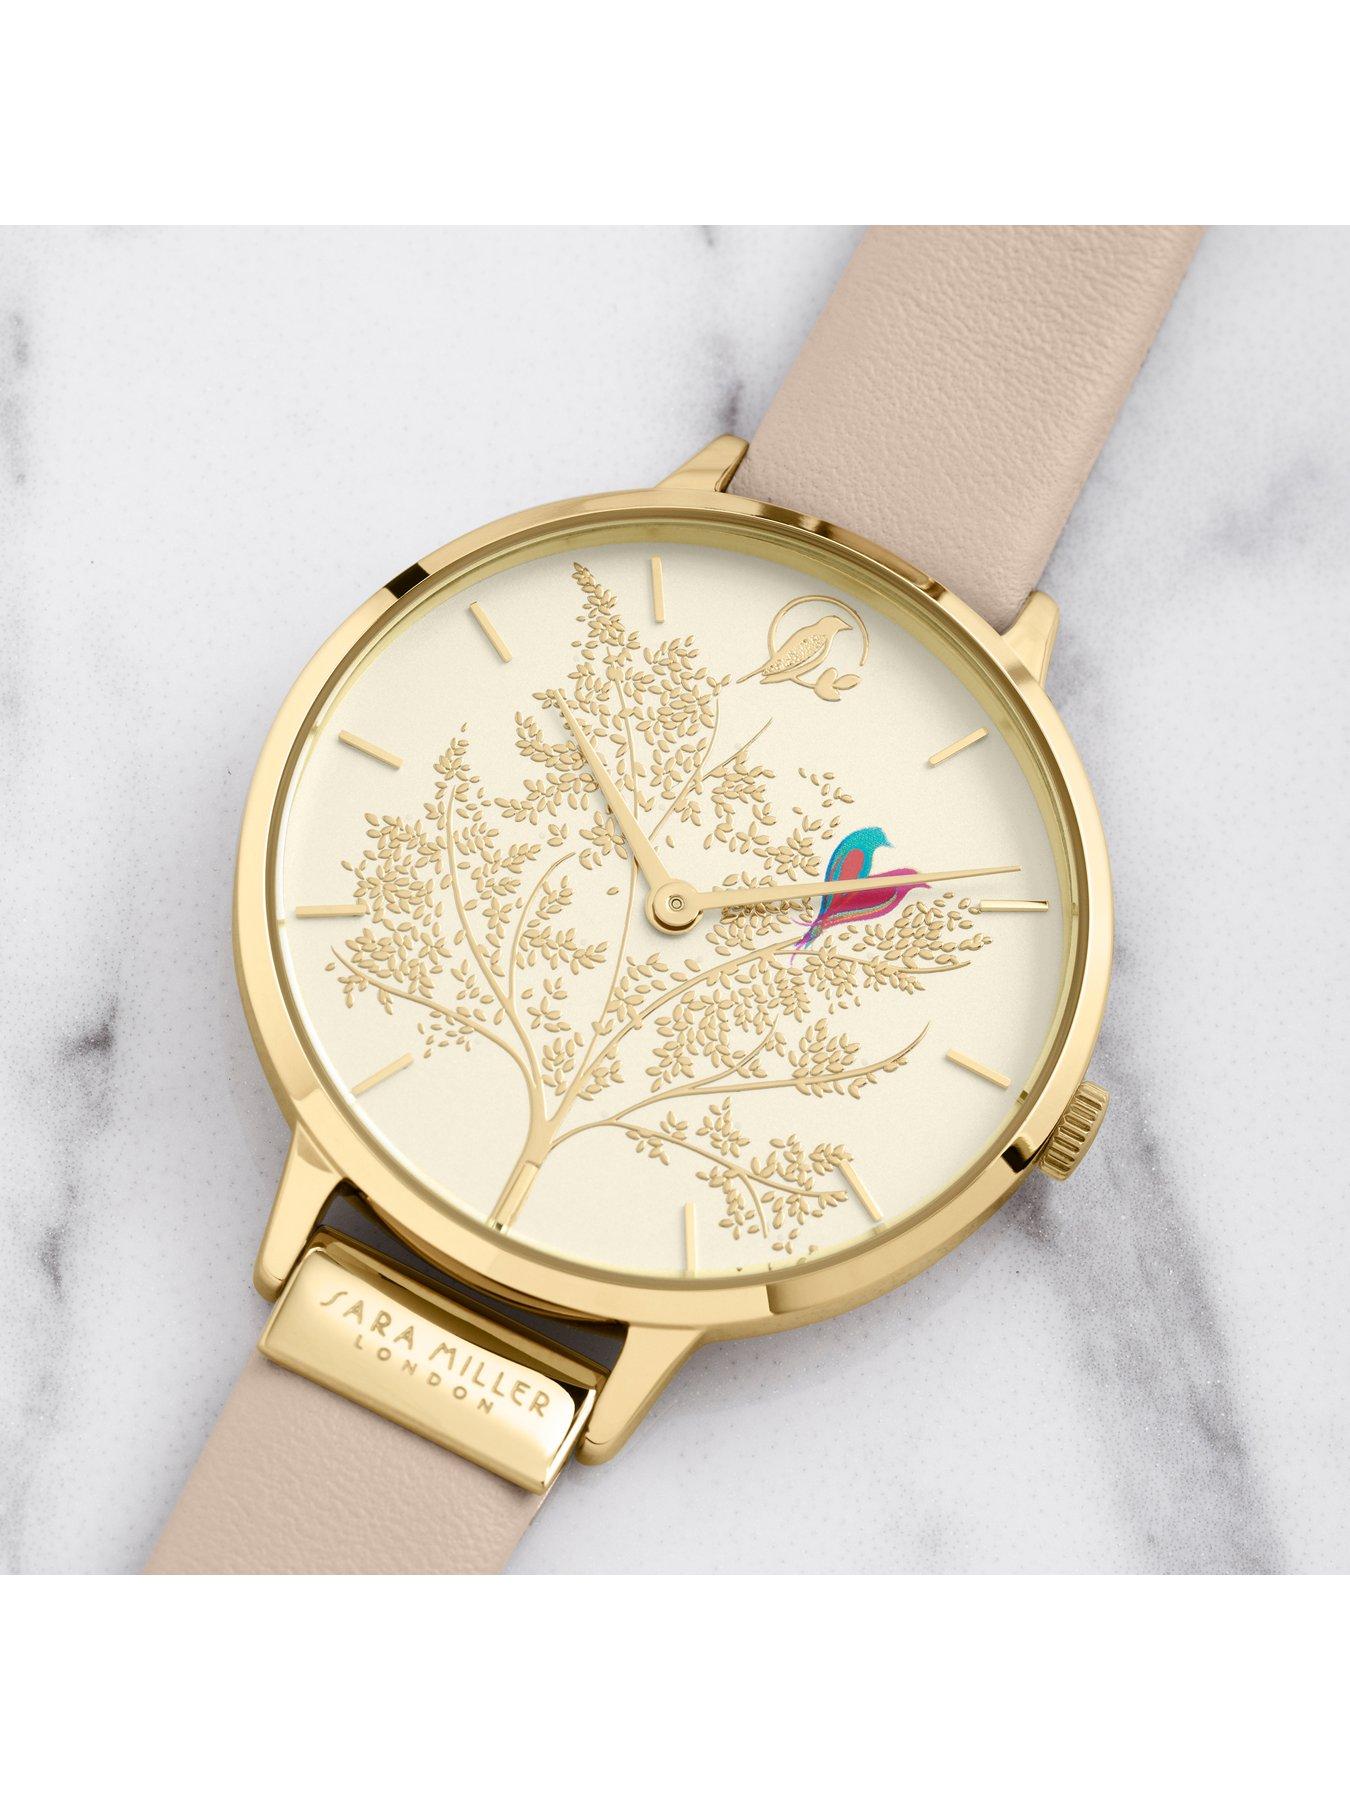 Jewellery & watches Chelsea White and Gold Detail Love Birds 38mm Dial Nude Leather Strap Ladies Watch - Nude